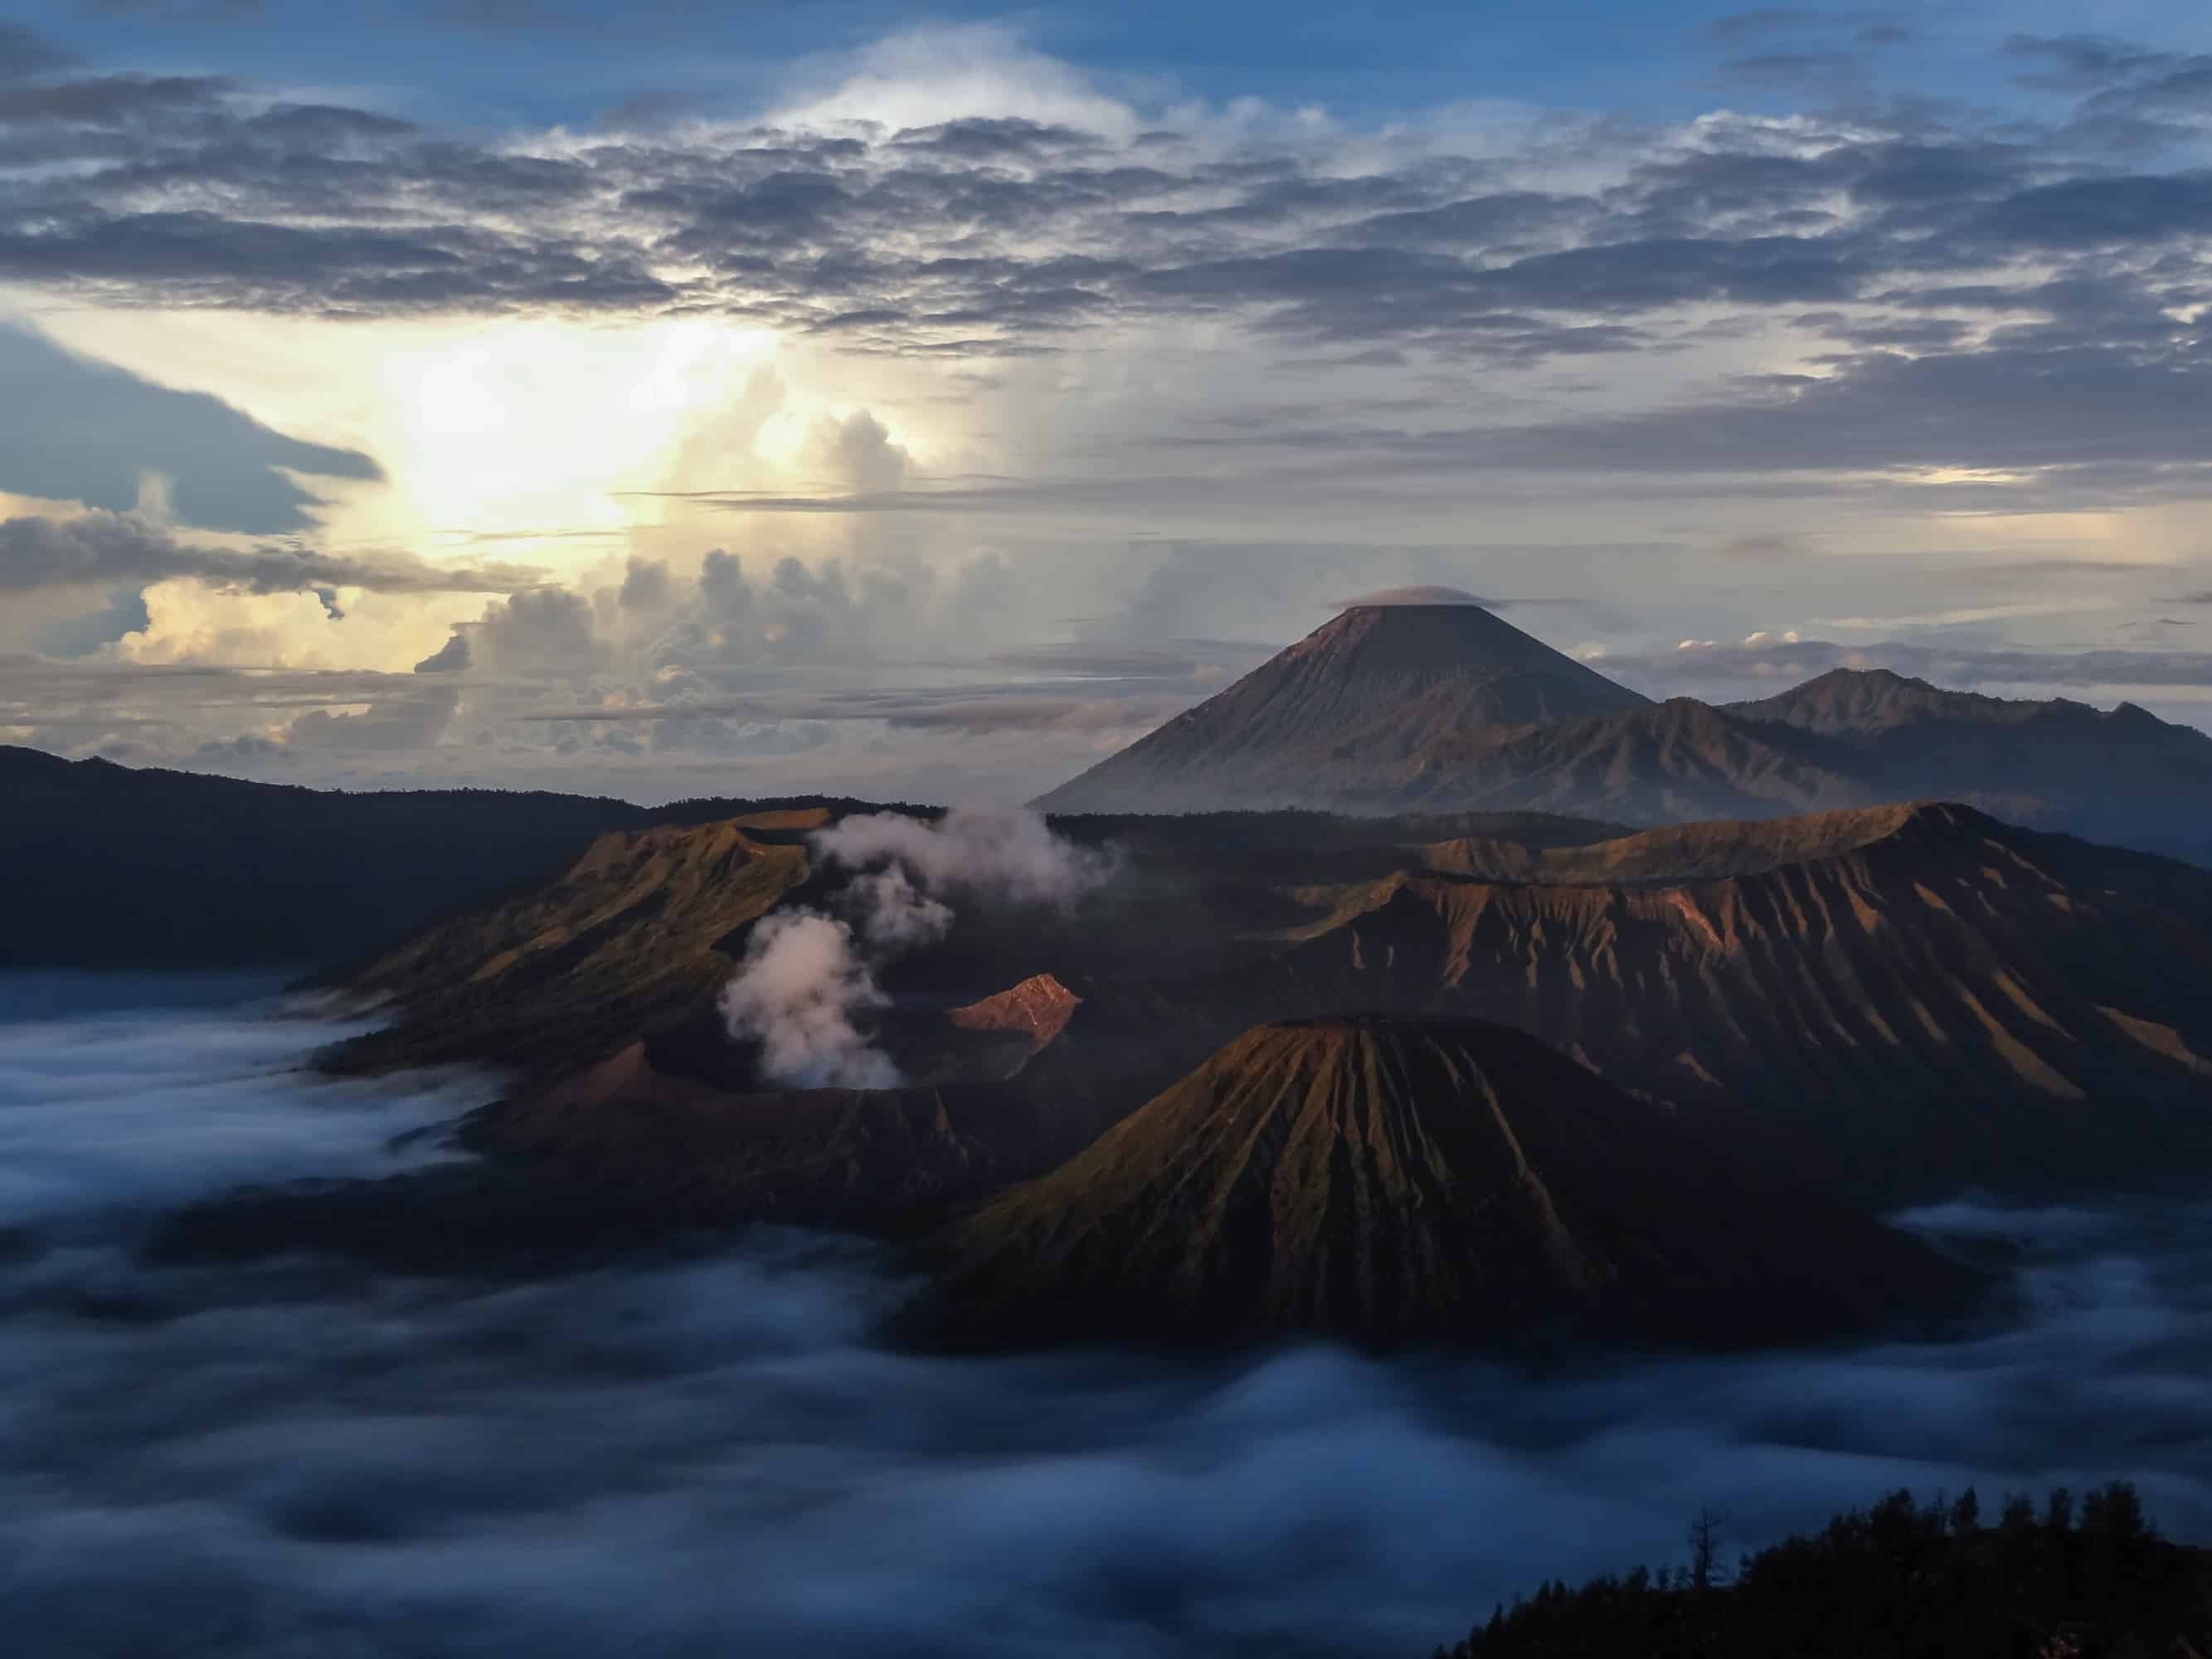 Sunrise at the mount Bromo in Indonesia